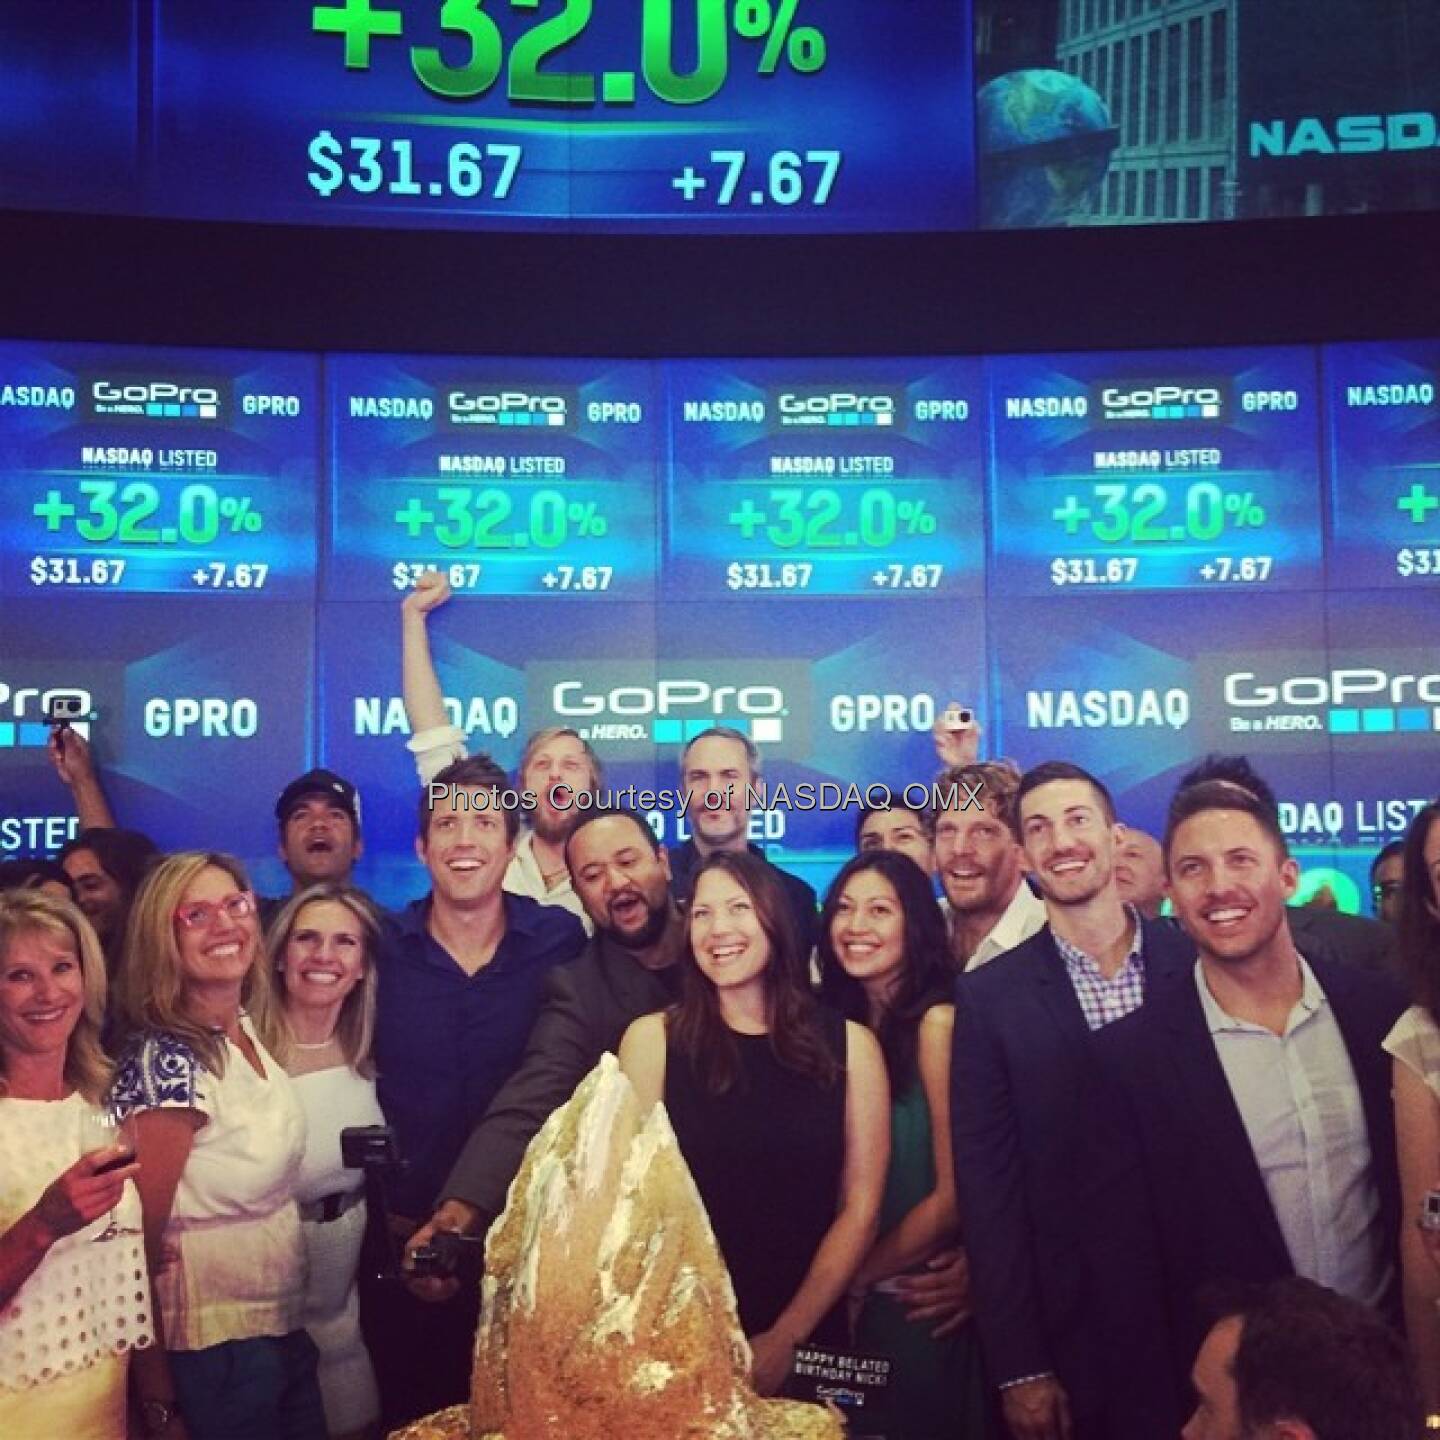 #GoPro celebration continues after #FirstTrade! Happy Belated Birthday Nick!  @GoPro #RiceKrispiesTreats Cake #IPO #Celebration  Source: http://facebook.com/NASDAQ